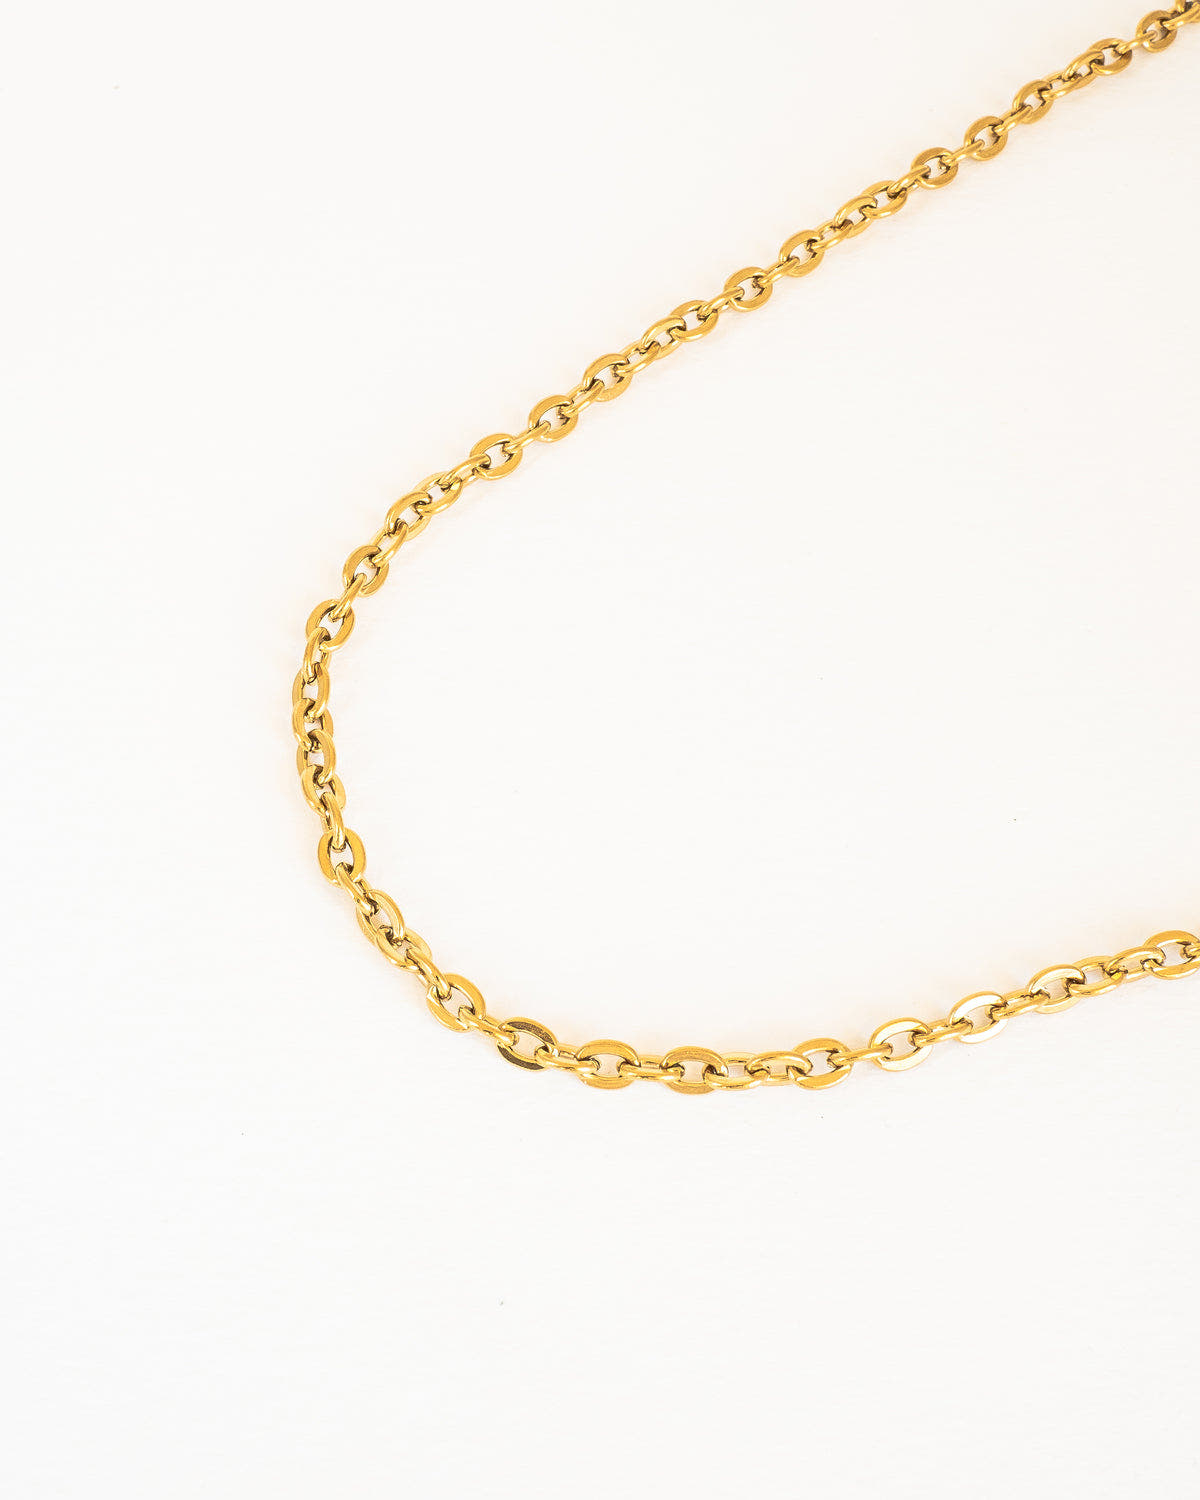 Stylish chain necklace Gold plated heavy necklace choker freeshipping - Ollijewelry